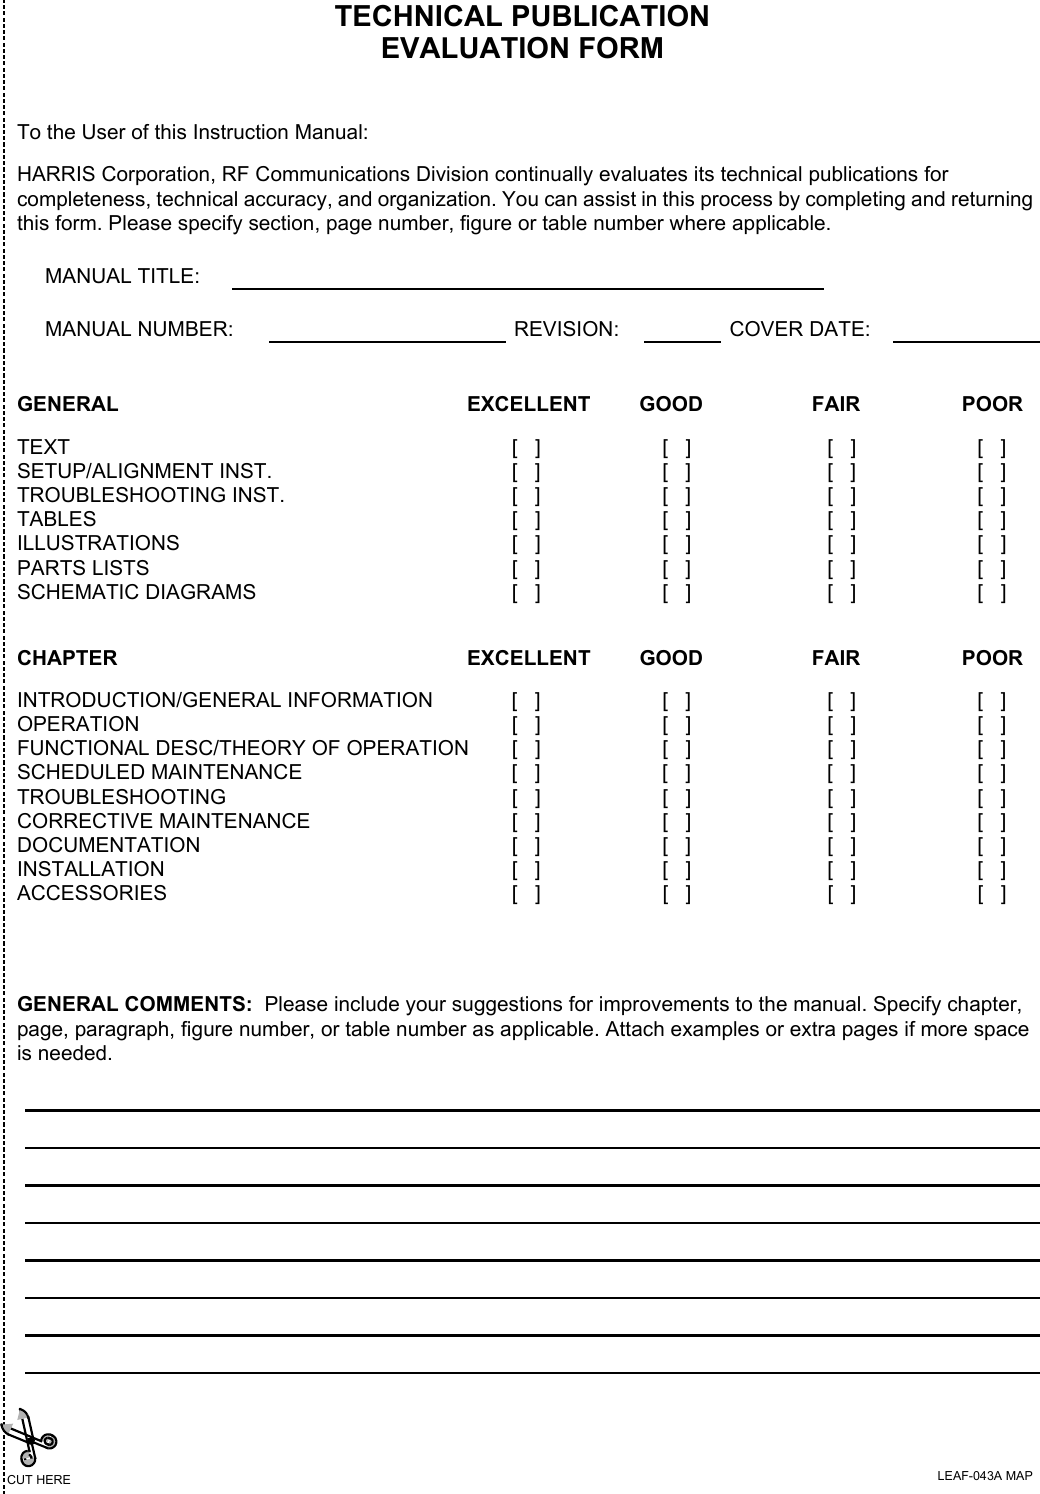 TECHNICAL PUBLICATIONEVALUATION FORMTo the User of this Instruction Manual:HARRIS Corporation, RF Communications Division continually evaluates its technical publications for completeness, technical accuracy, and organization. You can assist in this process by completing and returning this form. Please specify section, page number, figure or table number where applicable.MANUAL TITLE:MANUAL NUMBER: REVISION: COVER DATE:GENERAL EXCELLENT GOOD FAIR POORTEXT [   ] [   ] [   ] [   ]SETUP/ALIGNMENT INST. [   ] [   ] [   ] [   ]TROUBLESHOOTING INST. [   ] [   ] [   ] [   ]TABLES [   ] [   ] [   ] [   ]ILLUSTRATIONS [   ] [   ] [   ] [   ]PARTS LISTS [   ] [   ] [   ] [   ]SCHEMATIC DIAGRAMS [   ] [   ] [   ] [   ]GENERAL COMMENTS:  Please include your suggestions for improvements to the manual. Specify chapter, page, paragraph, figure number, or table number as applicable. Attach examples or extra pages if more space is needed.CHAPTER EXCELLENT GOOD FAIR POORINTRODUCTION/GENERAL INFORMATION [   ] [   ] [   ] [   ]OPERATION [   ] [   ] [   ] [   ]FUNCTIONAL DESC/THEORY OF OPERATION [   ] [   ] [   ] [   ]SCHEDULED MAINTENANCE [   ] [   ] [   ] [   ]TROUBLESHOOTING [   ] [   ] [   ] [   ]CORRECTIVE MAINTENANCE [   ] [   ] [   ] [   ]DOCUMENTATION [   ] [   ] [   ] [   ]INSTALLATION [   ] [   ] [   ] [   ]ACCESSORIES [   ] [   ] [   ] [   ]CUT HERE LEAF-043A MAP